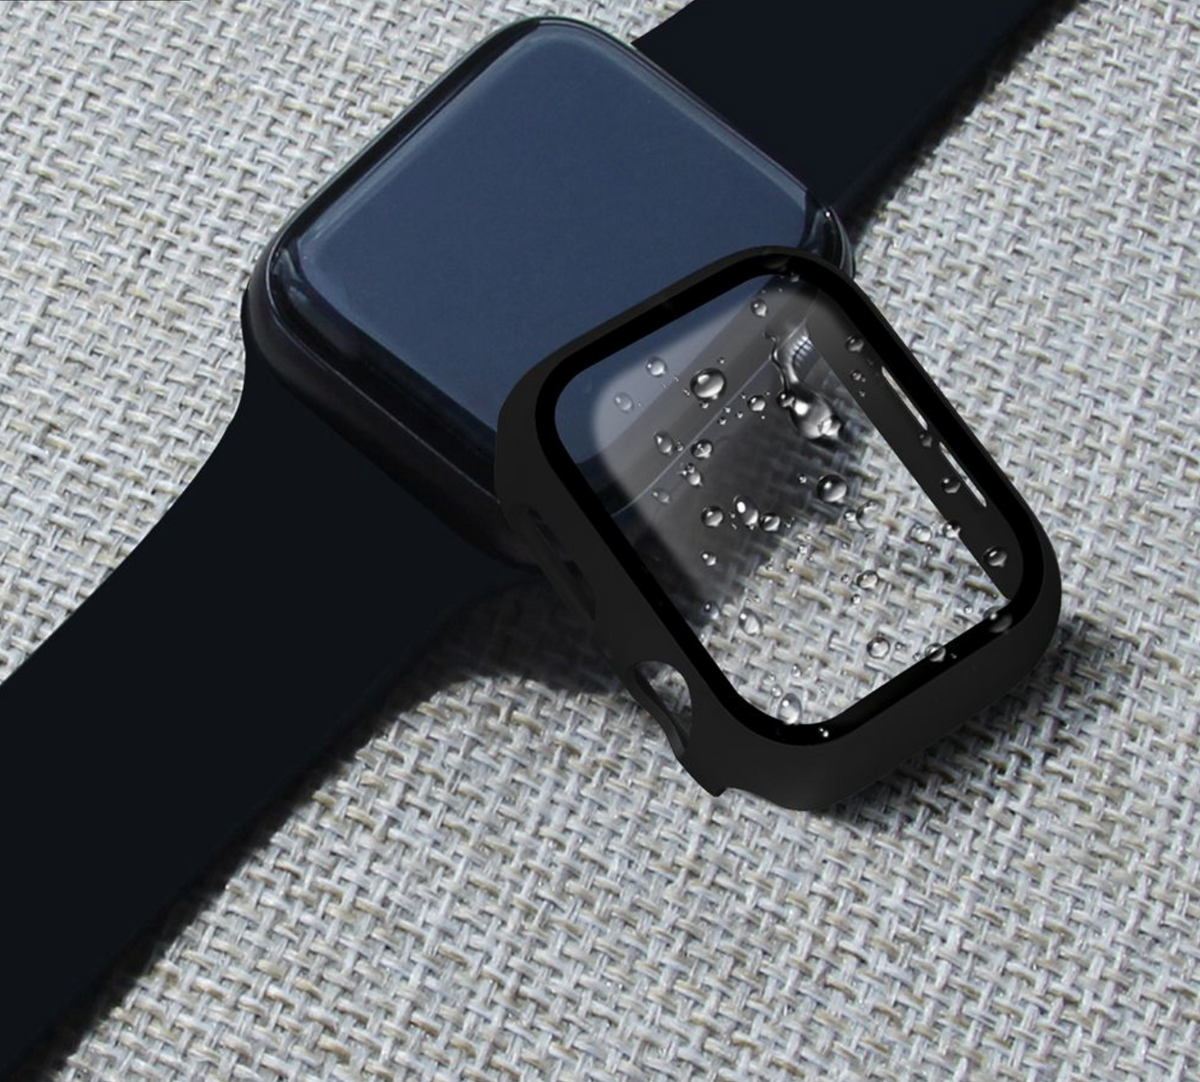 Apple Watch Hybrid Cover (Tempered Glass + Case Protector) | OzStraps